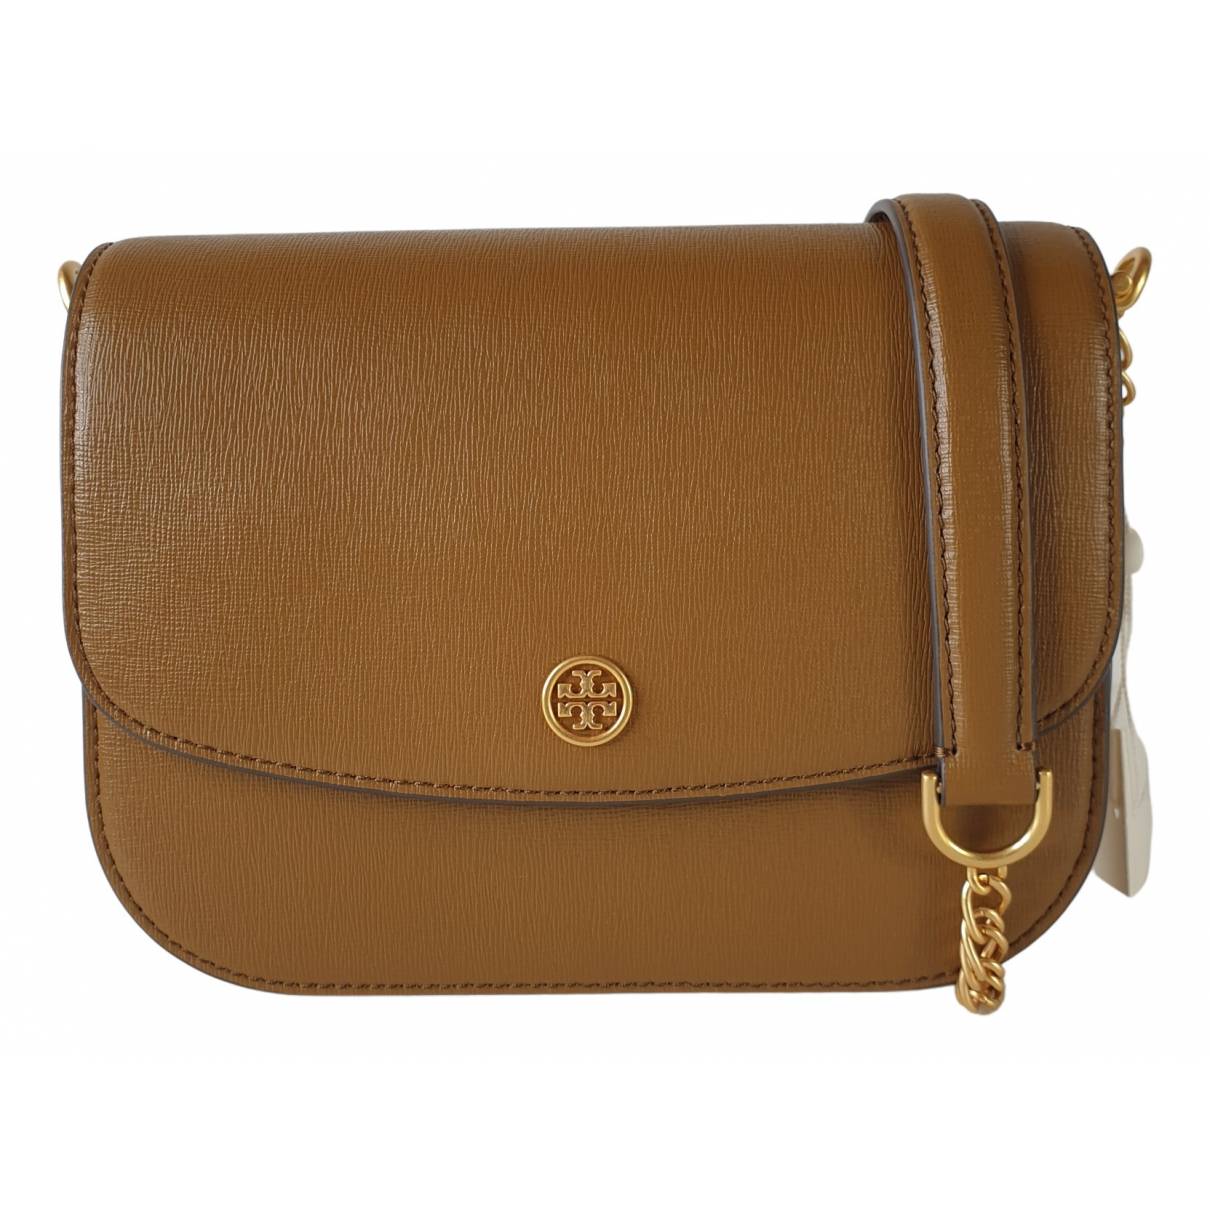 Leather crossbody bag Tory Burch Camel in Leather - 23025880